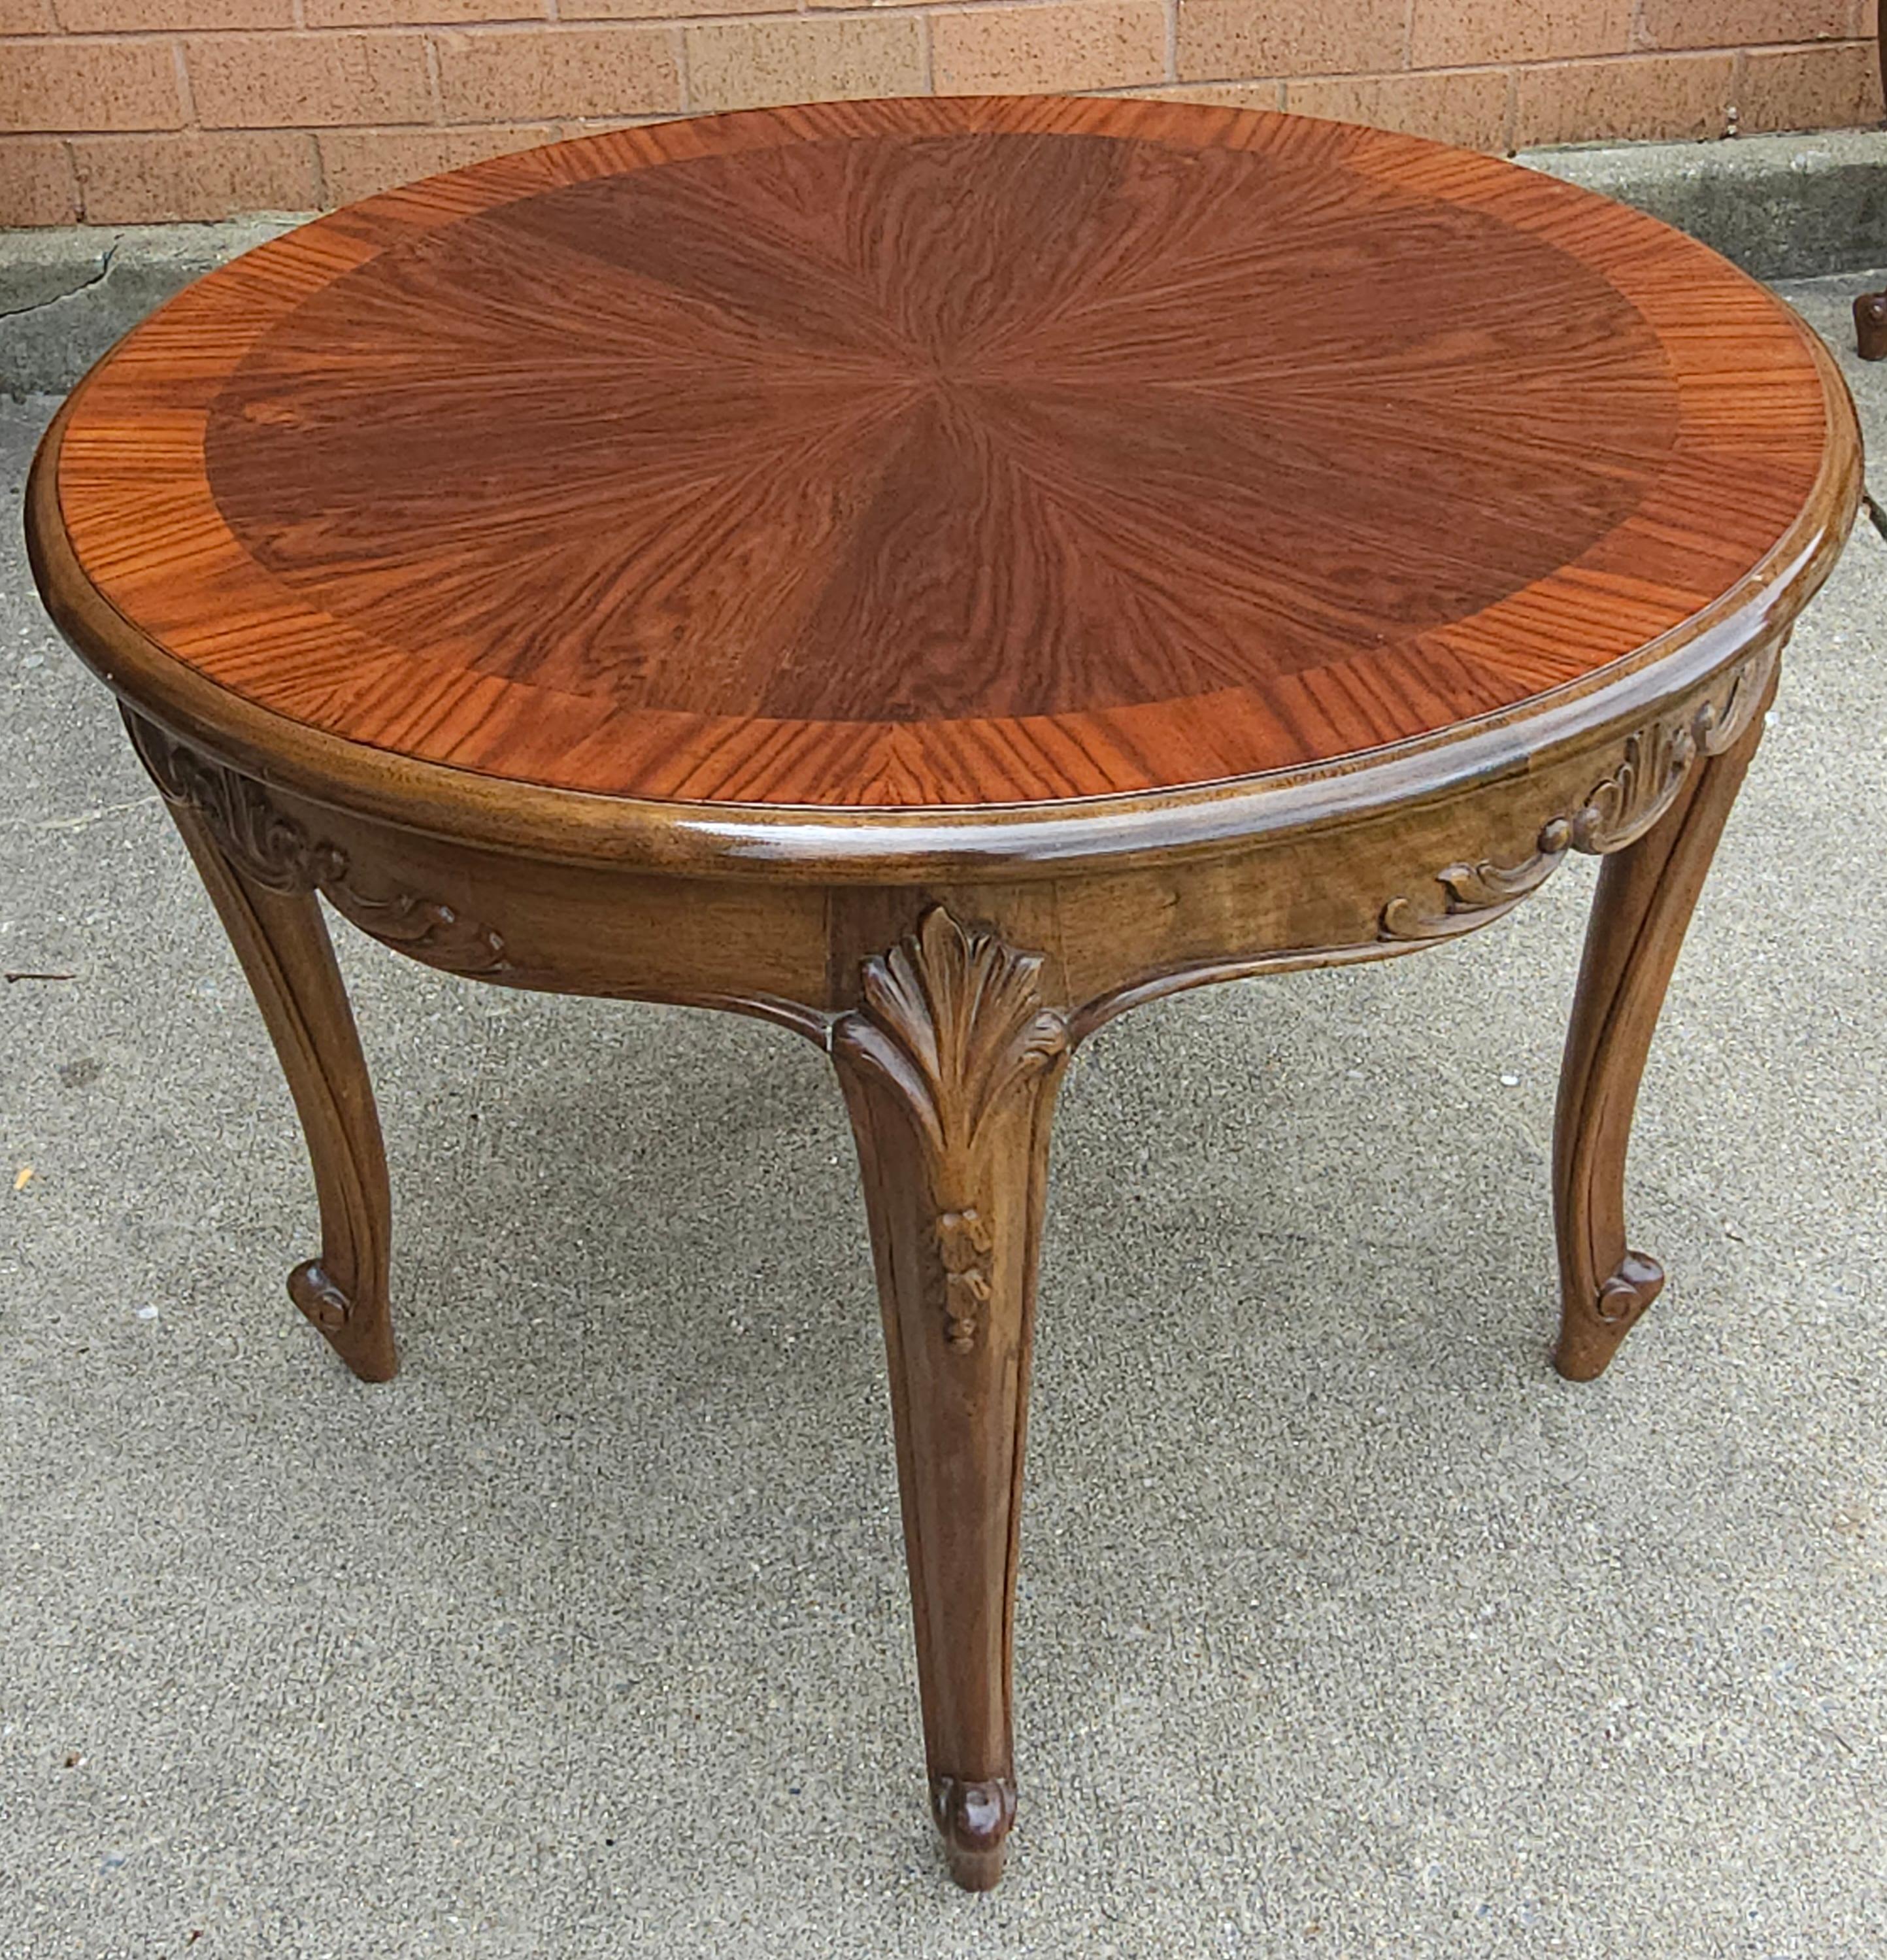 French Provincial 20th C. Handcrafted Bookmatched Brazilian Rosewood Provincial Gueridon For Sale